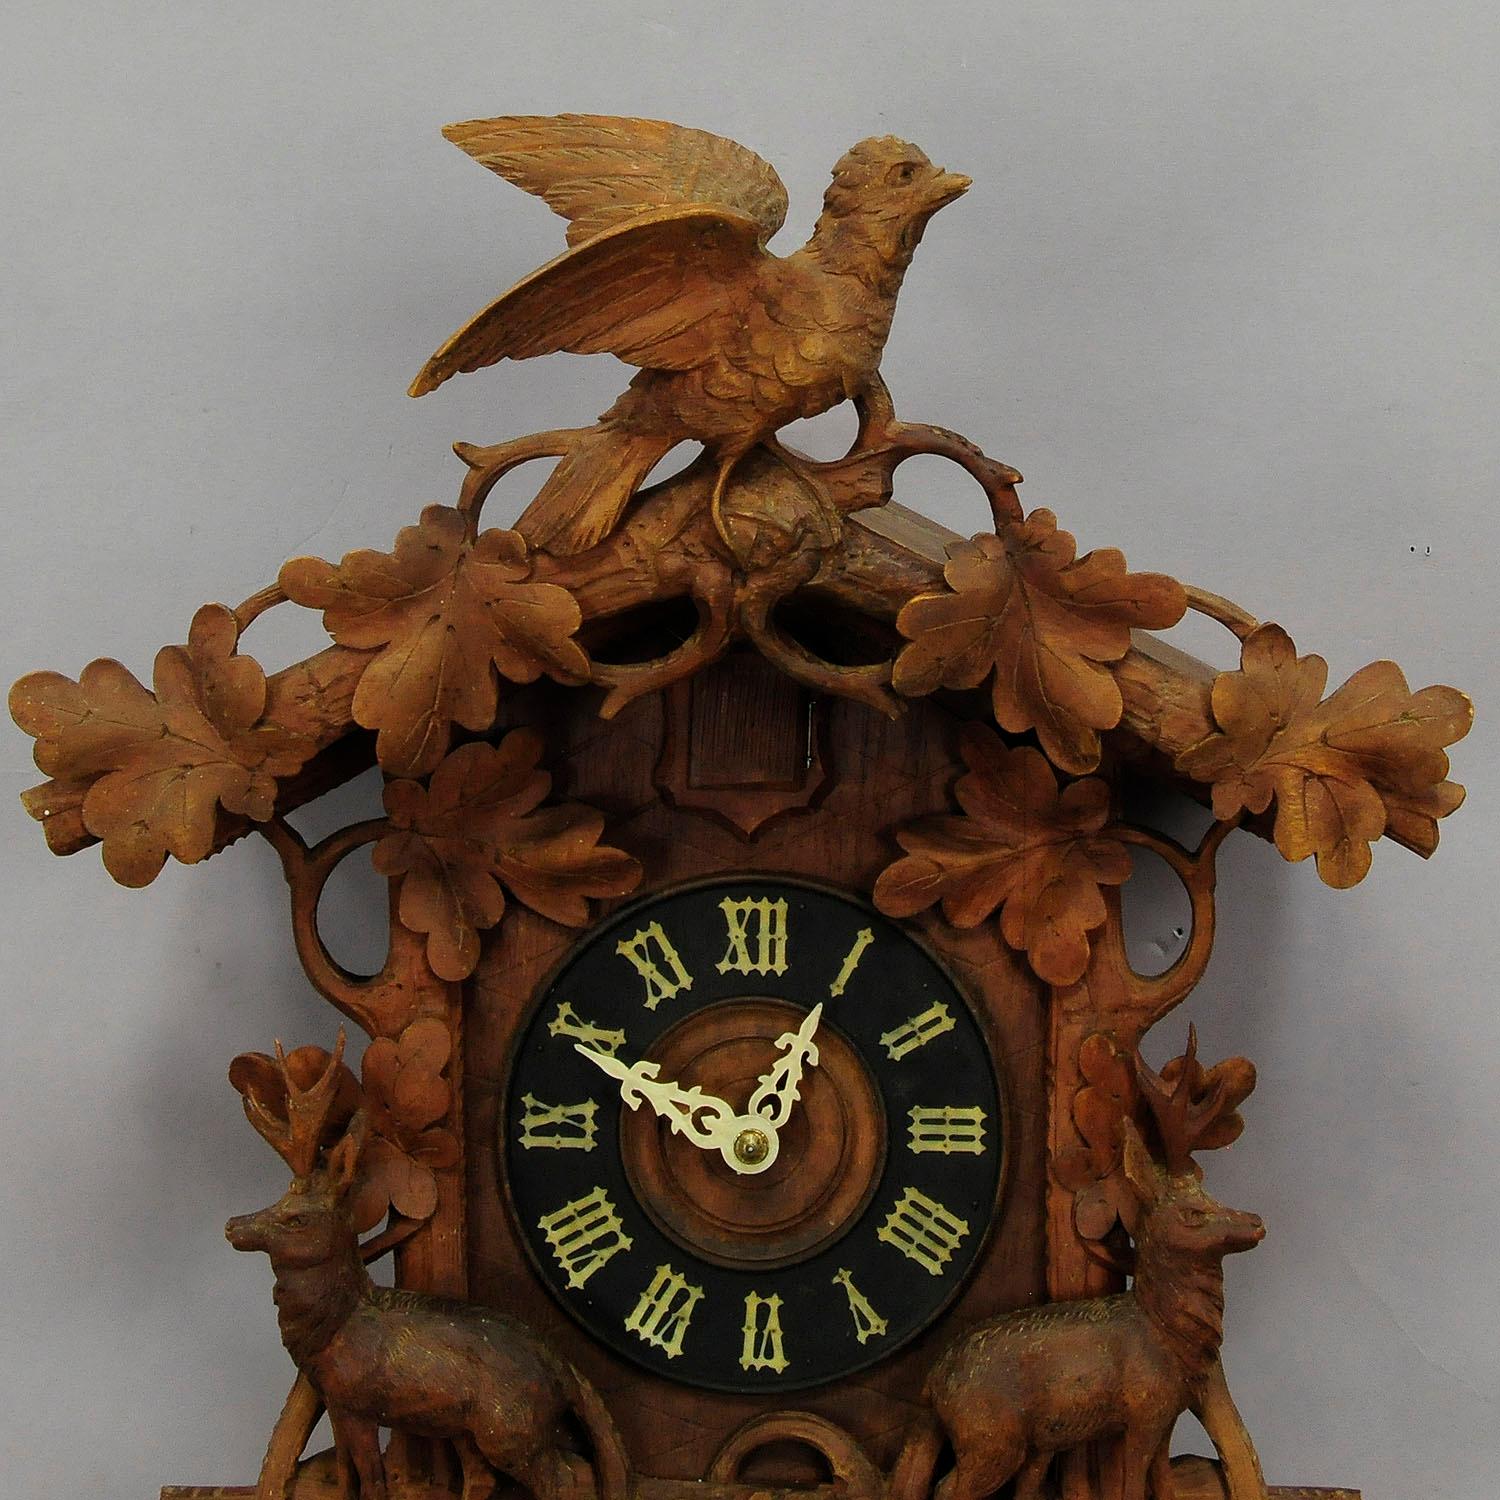 A detailed hand carved wooden cuckoo clock, decorated with branches, oak leaves, two deers and a bird on top. Black Forest, Germany, circa 1900. Clockwork in working condition, overworked by a clockmaker.

Measures: Width 15.35